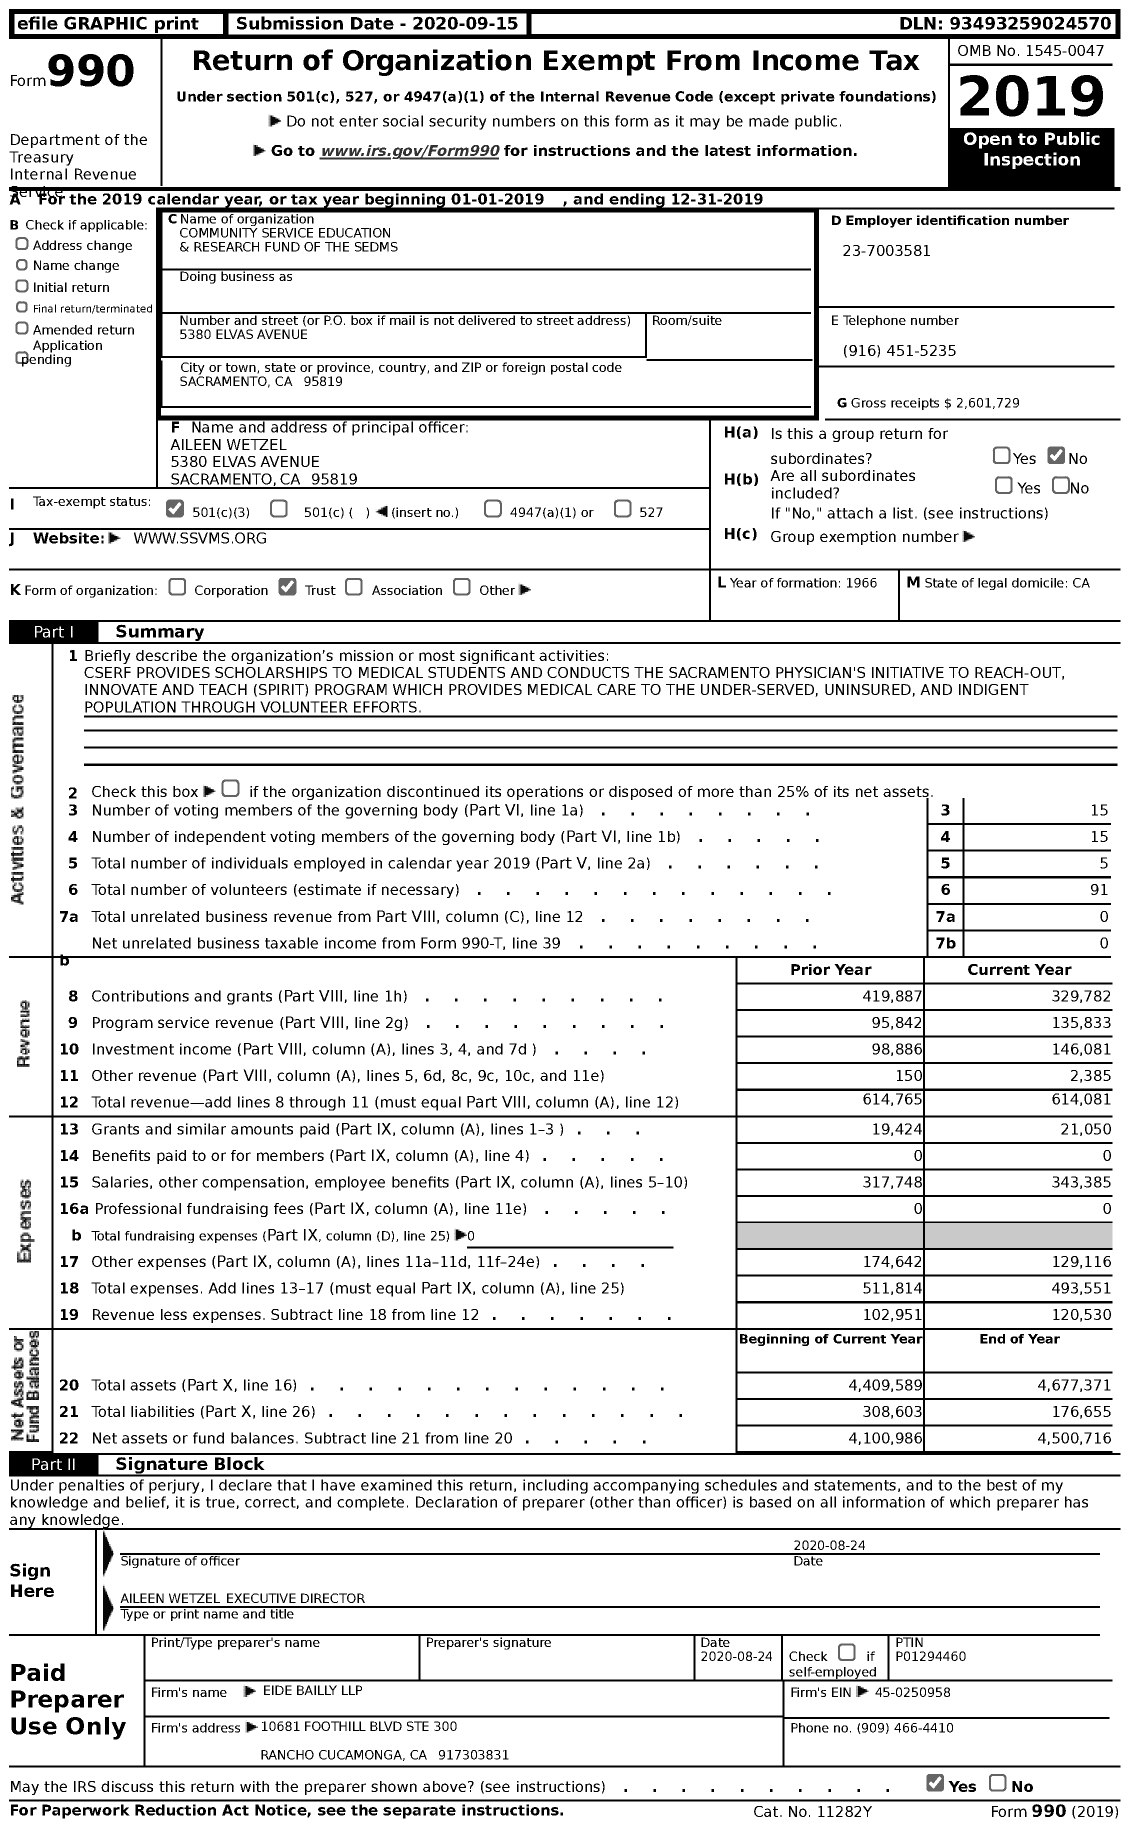 Image of first page of 2019 Form 990 for Community Service Education and Research Fund of the SEDMS